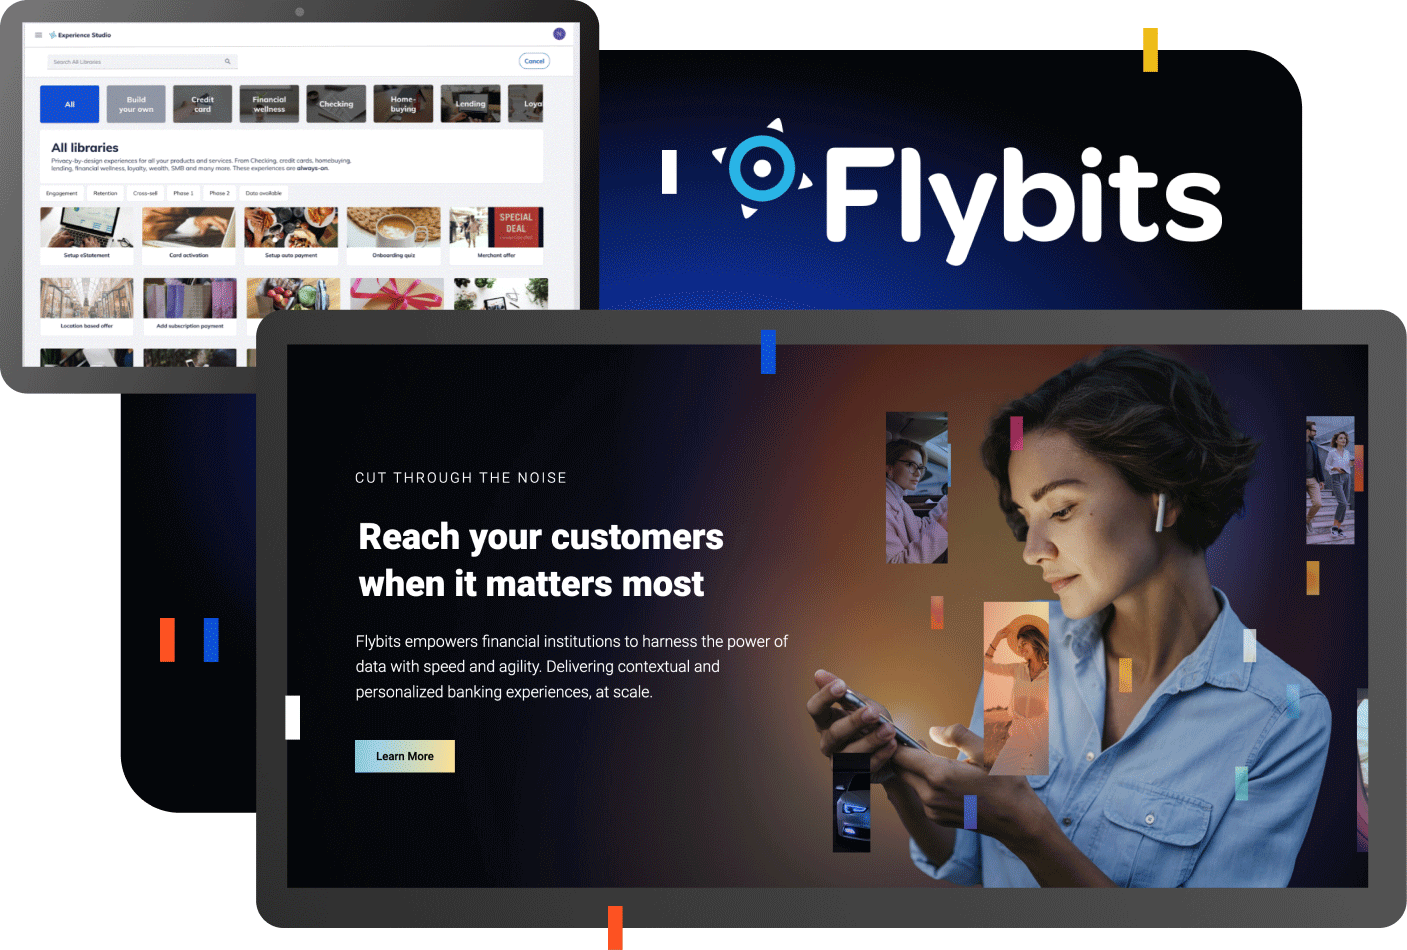 Screen captures from the Flybits website showing woman using the app